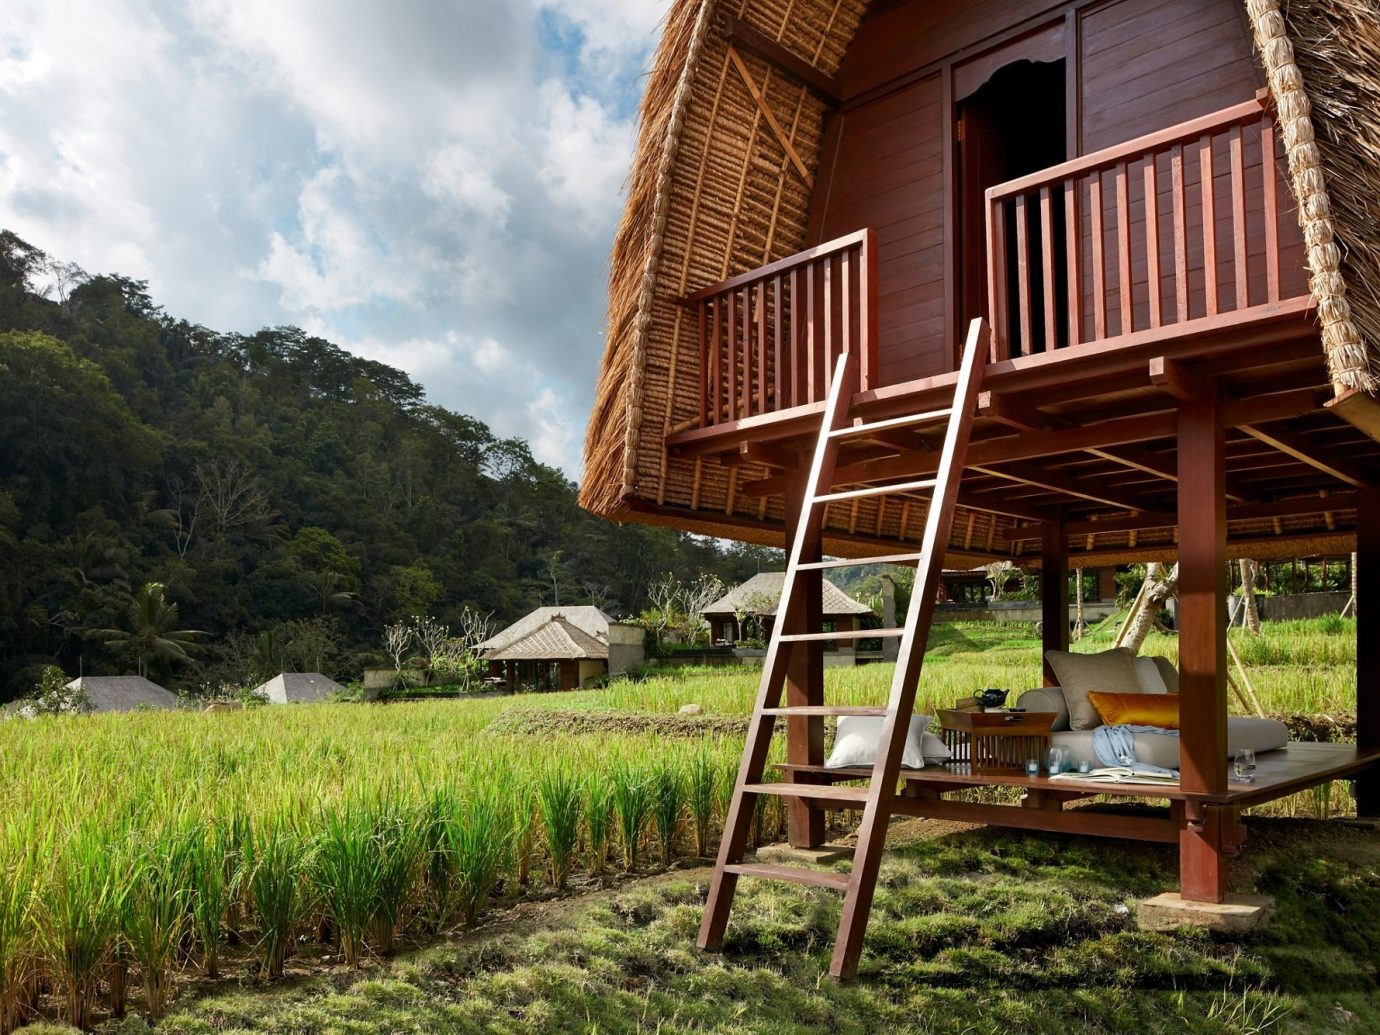 Health + Wellness Hotels grass outdoor sky house agriculture rural area lawn hut cottage outdoor structure